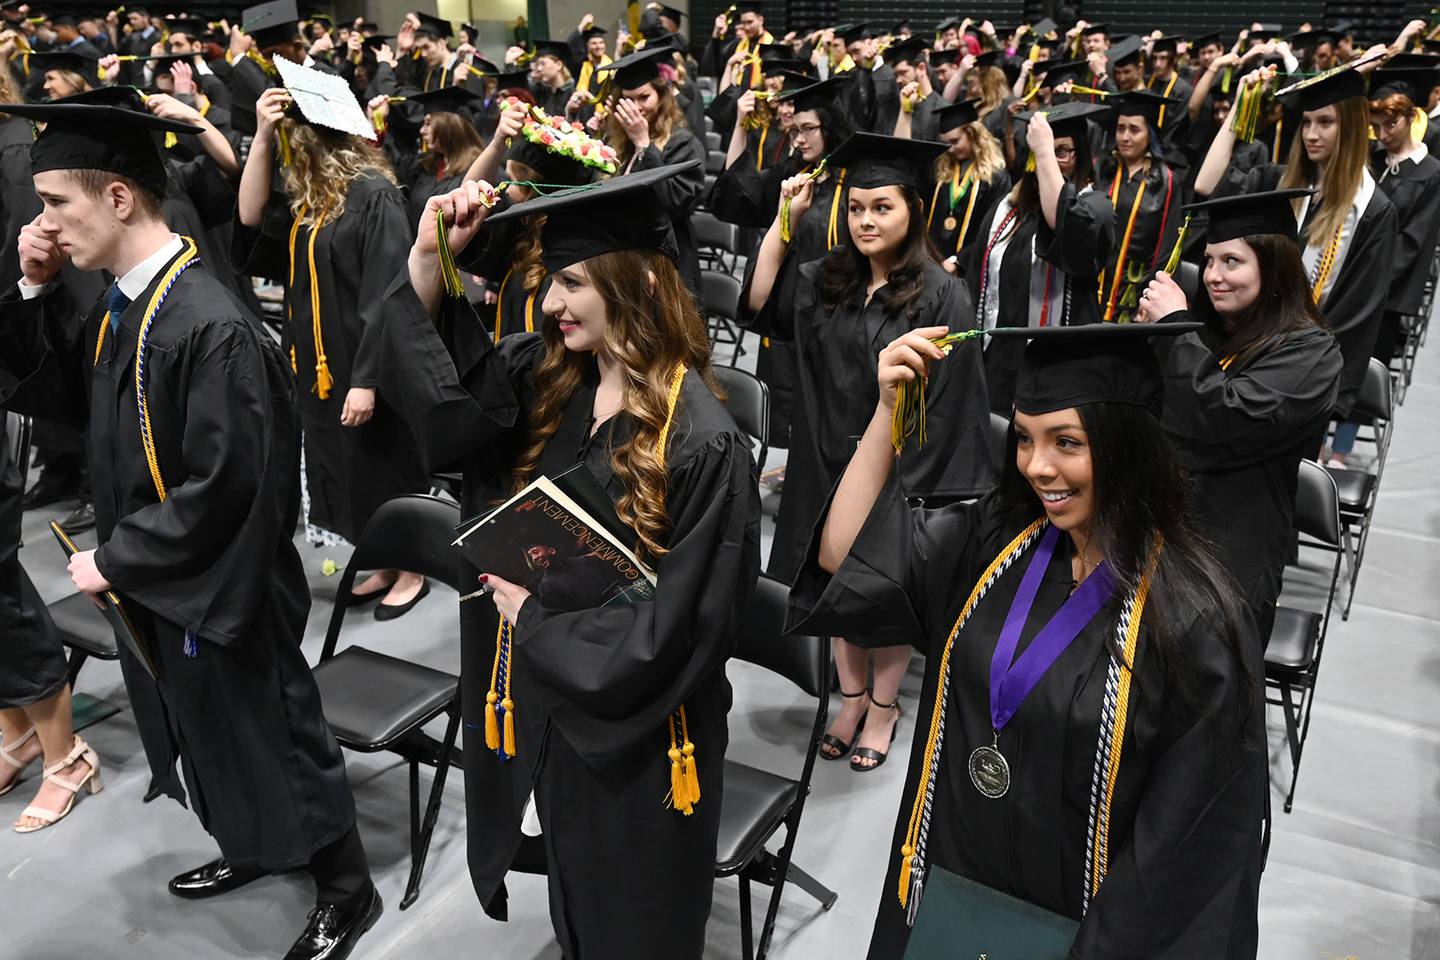 Photos: UAA spring class of 2022 commencement - Anchorage Daily News